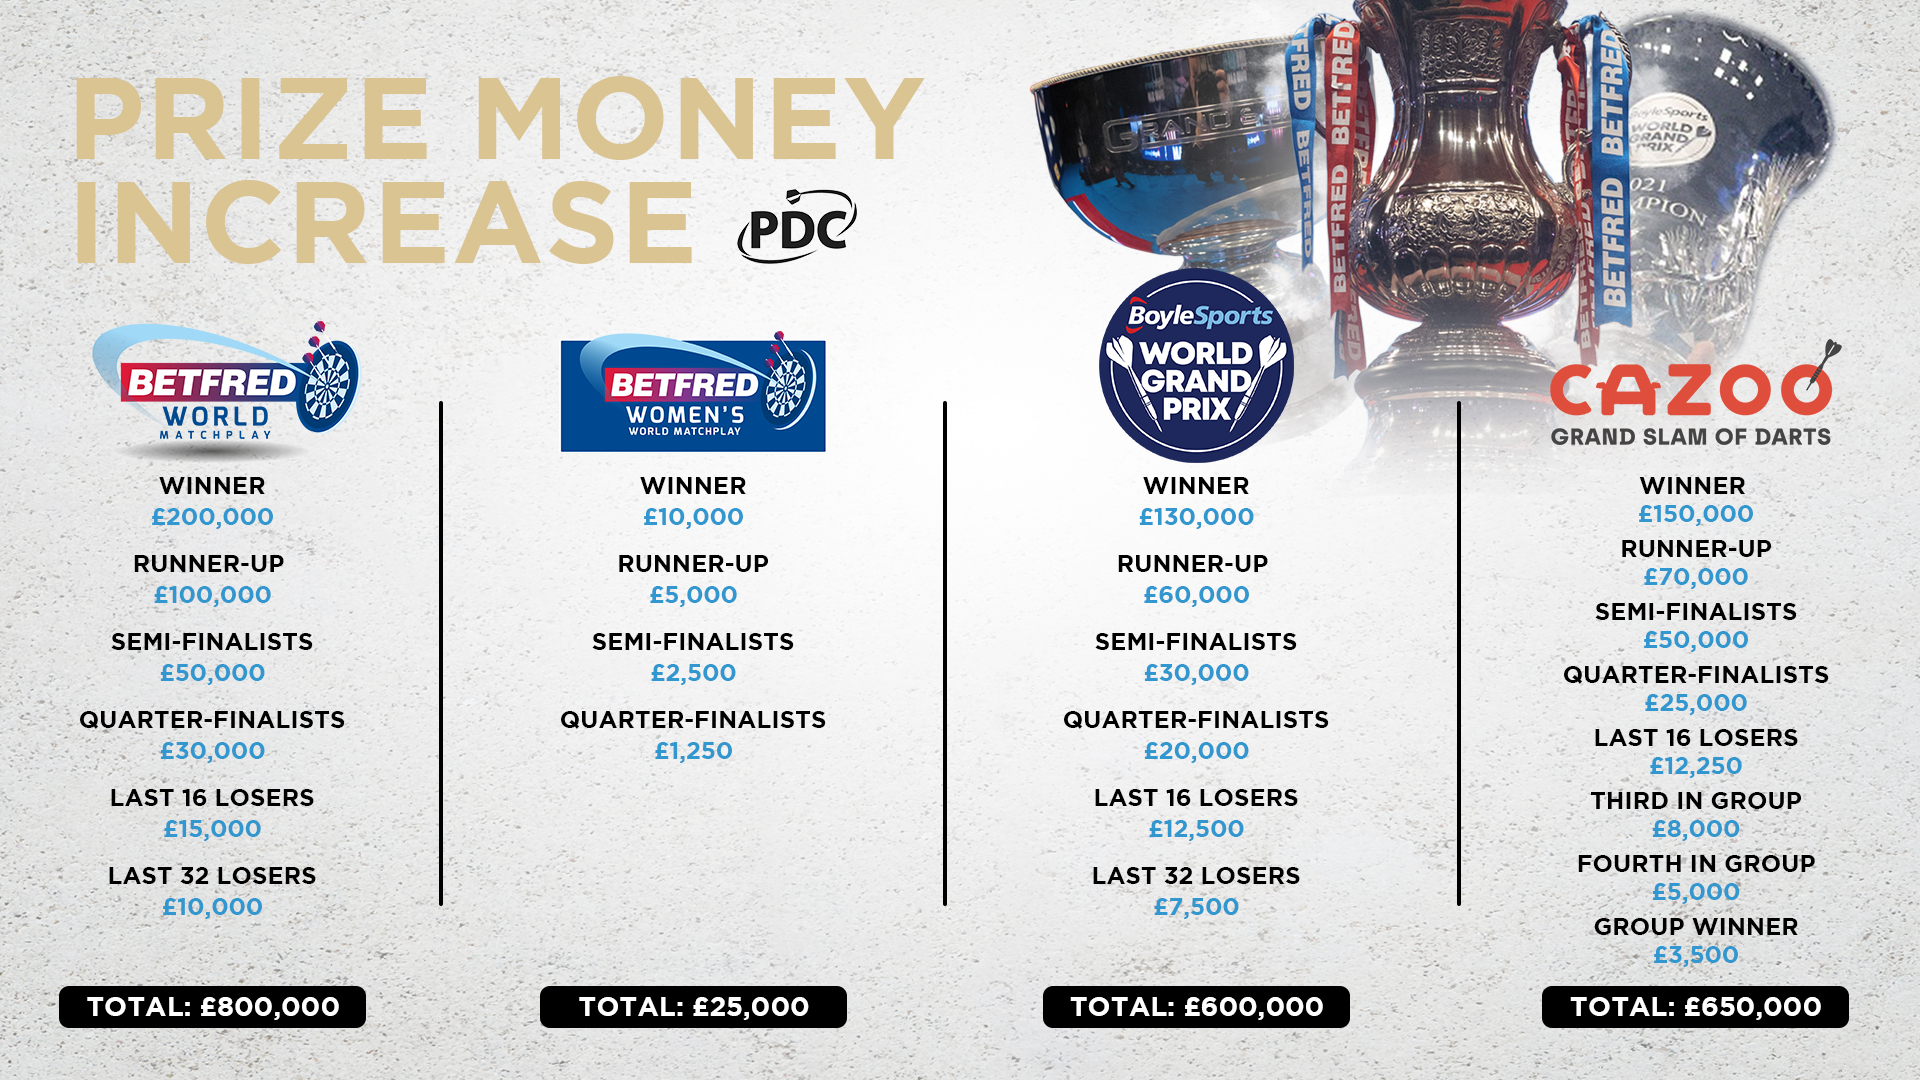 PDC Darts on Twitter: "Increased prize funds for this year's @Betfred World Matchplay, @BoyleSports World Grand Prix and @CazooUK Grand Slam of Darts have been confirmed, along with prize fund for